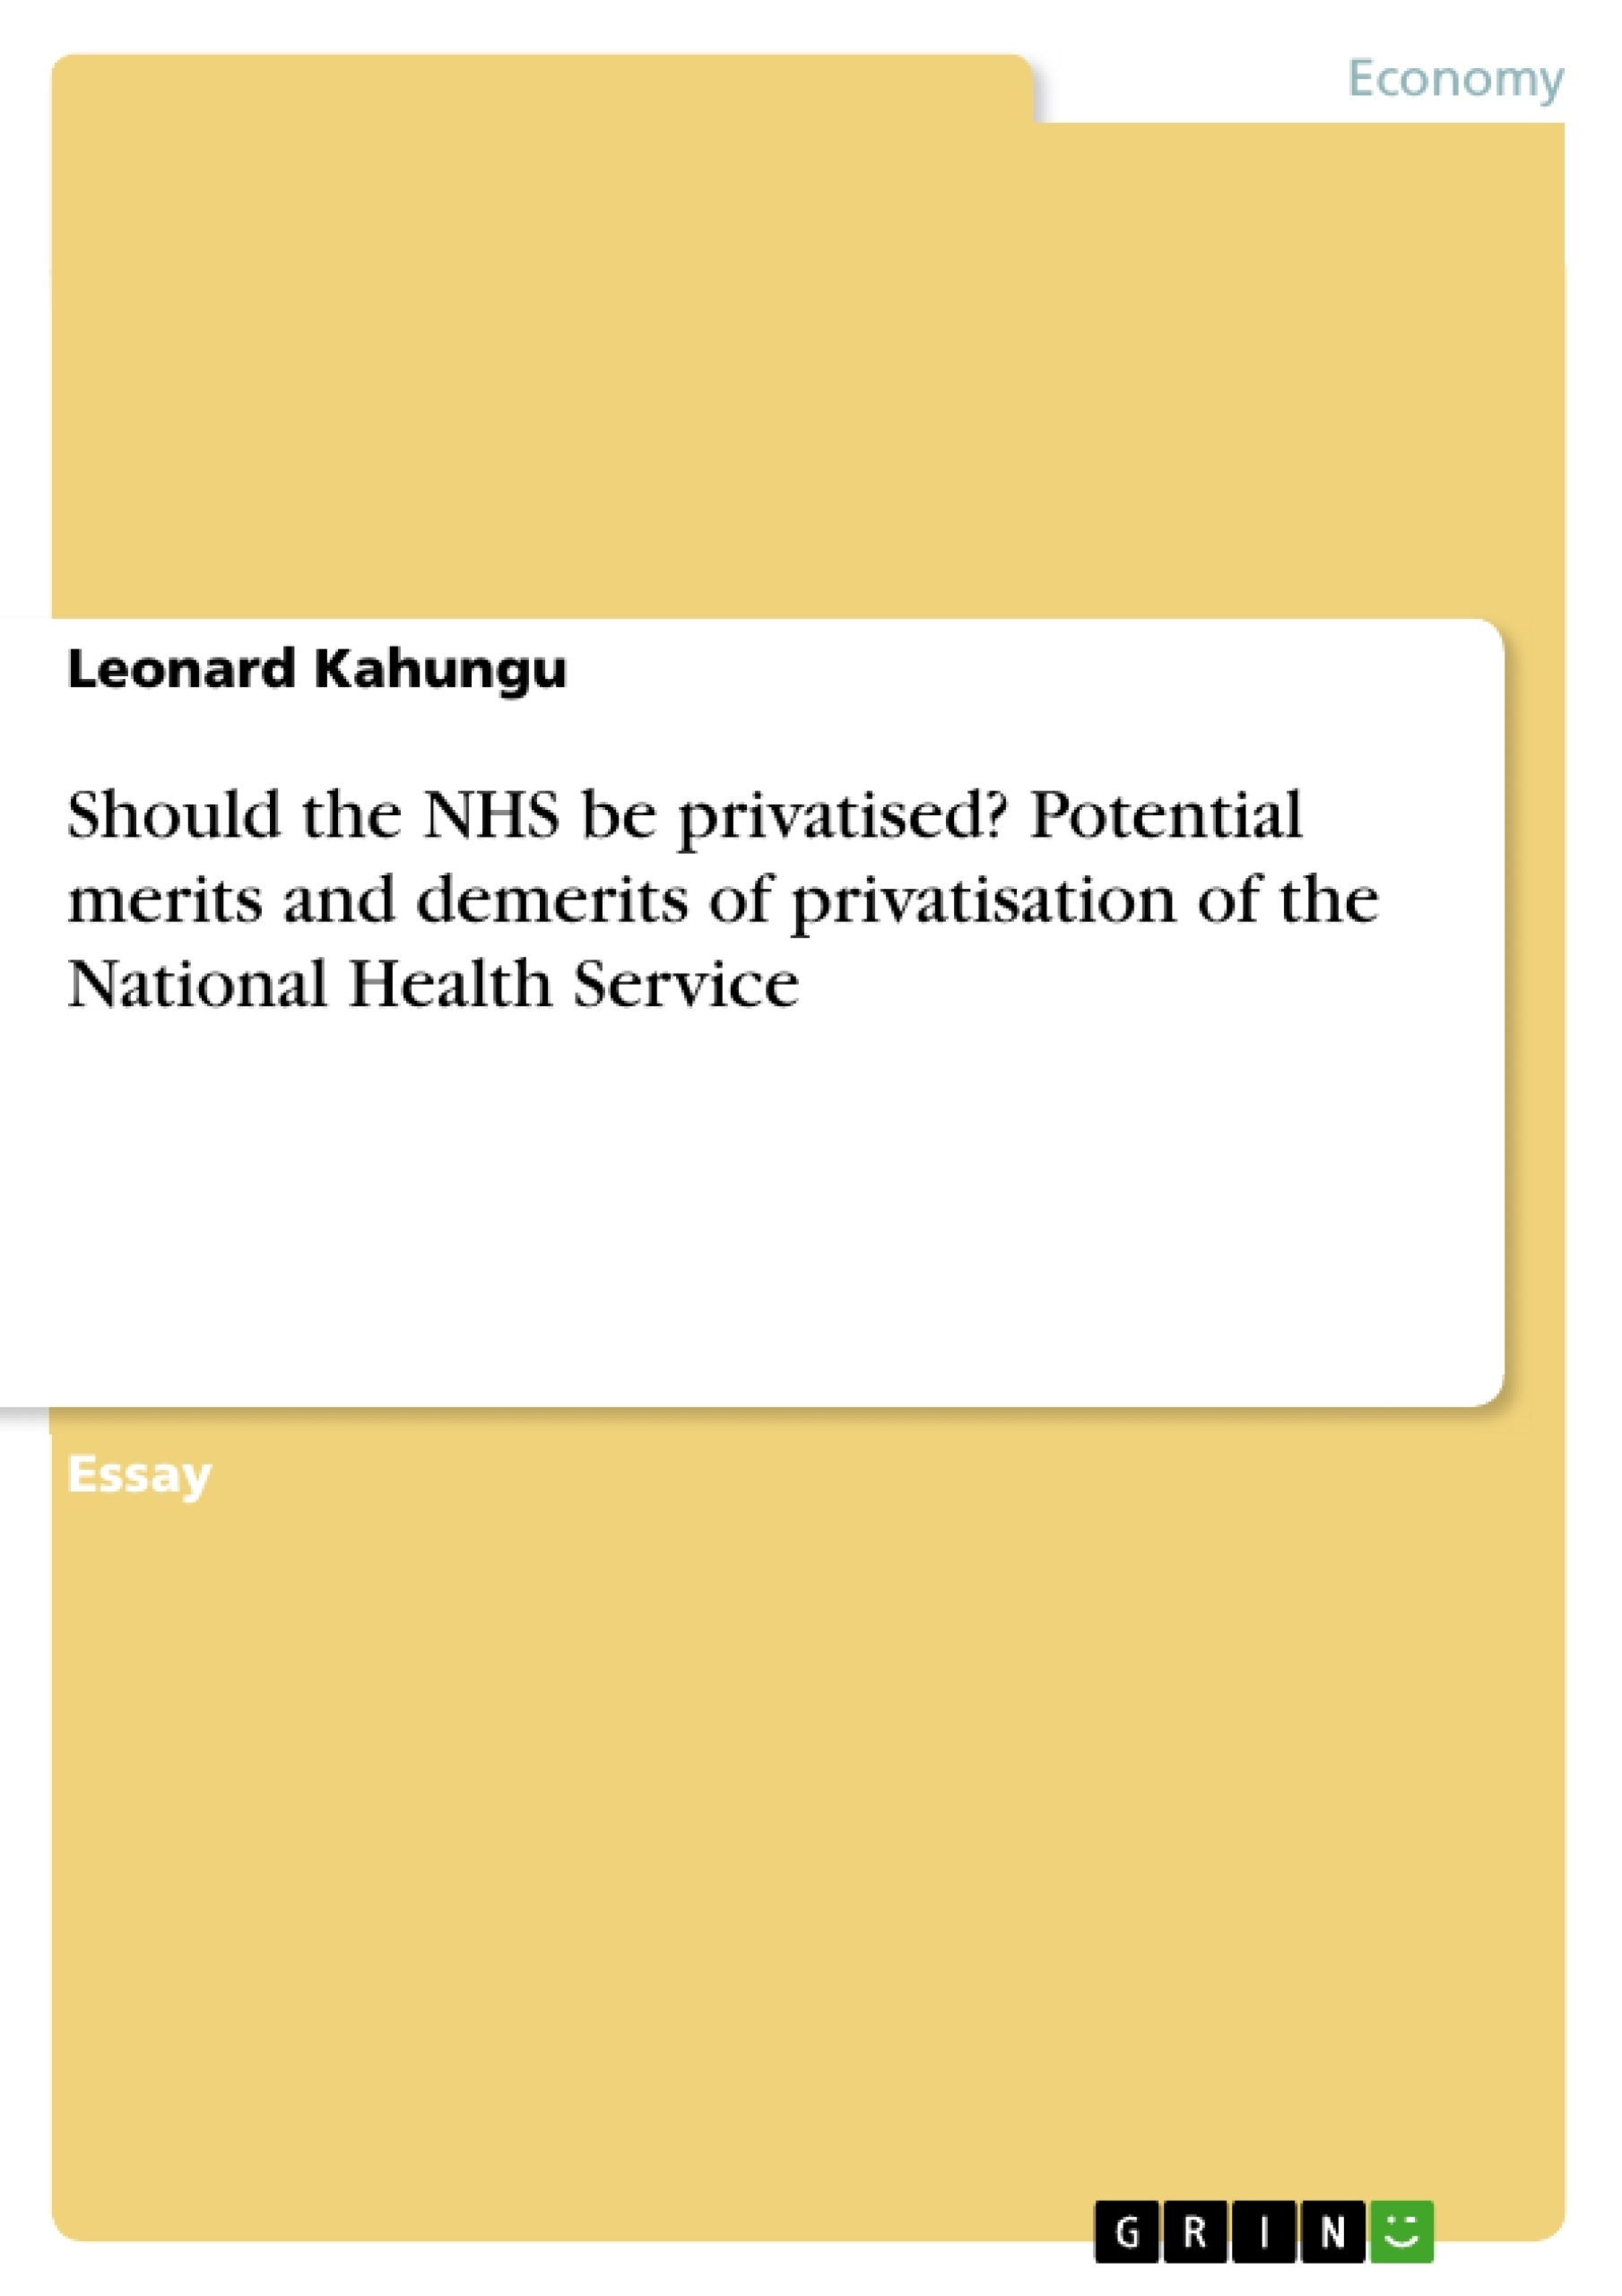 Title: Should the NHS be privatised? Potential merits and demerits of privatisation of the National Health Service